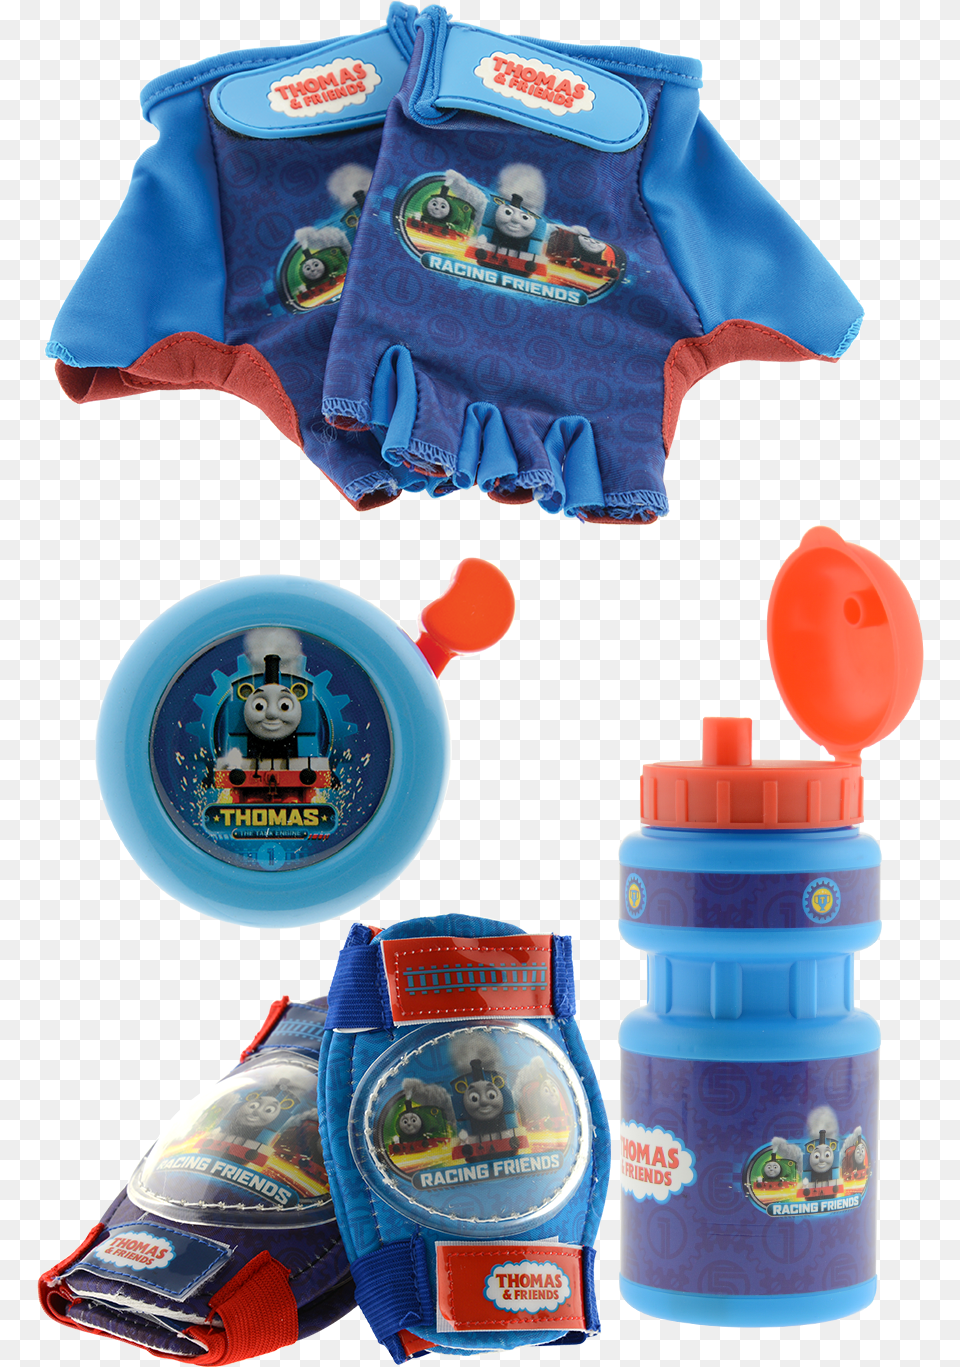 Cycle Accessories Thomas Amp Friends Bicycle Mitts, Clothing, Vest, Lifejacket Png Image